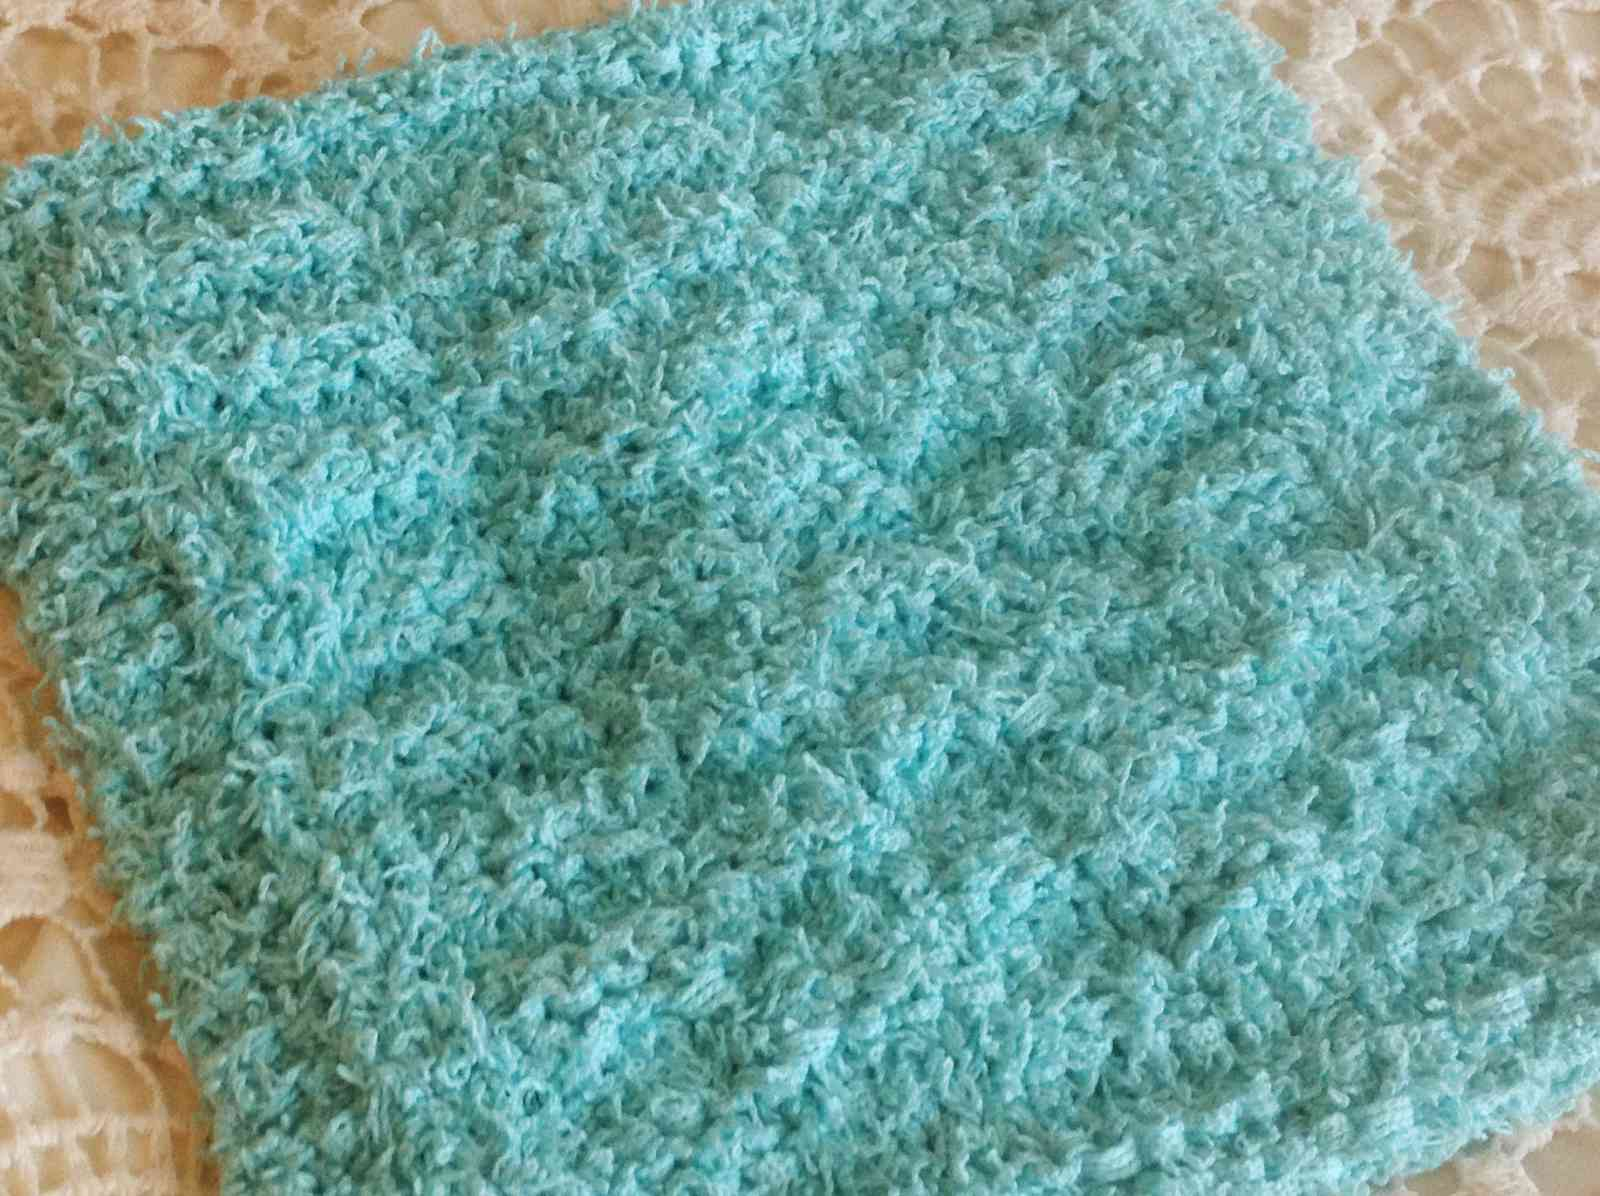 Free Knitted Cotton Dishcloth Patterns 10 Knit Dishcloth Patterns For Beginners